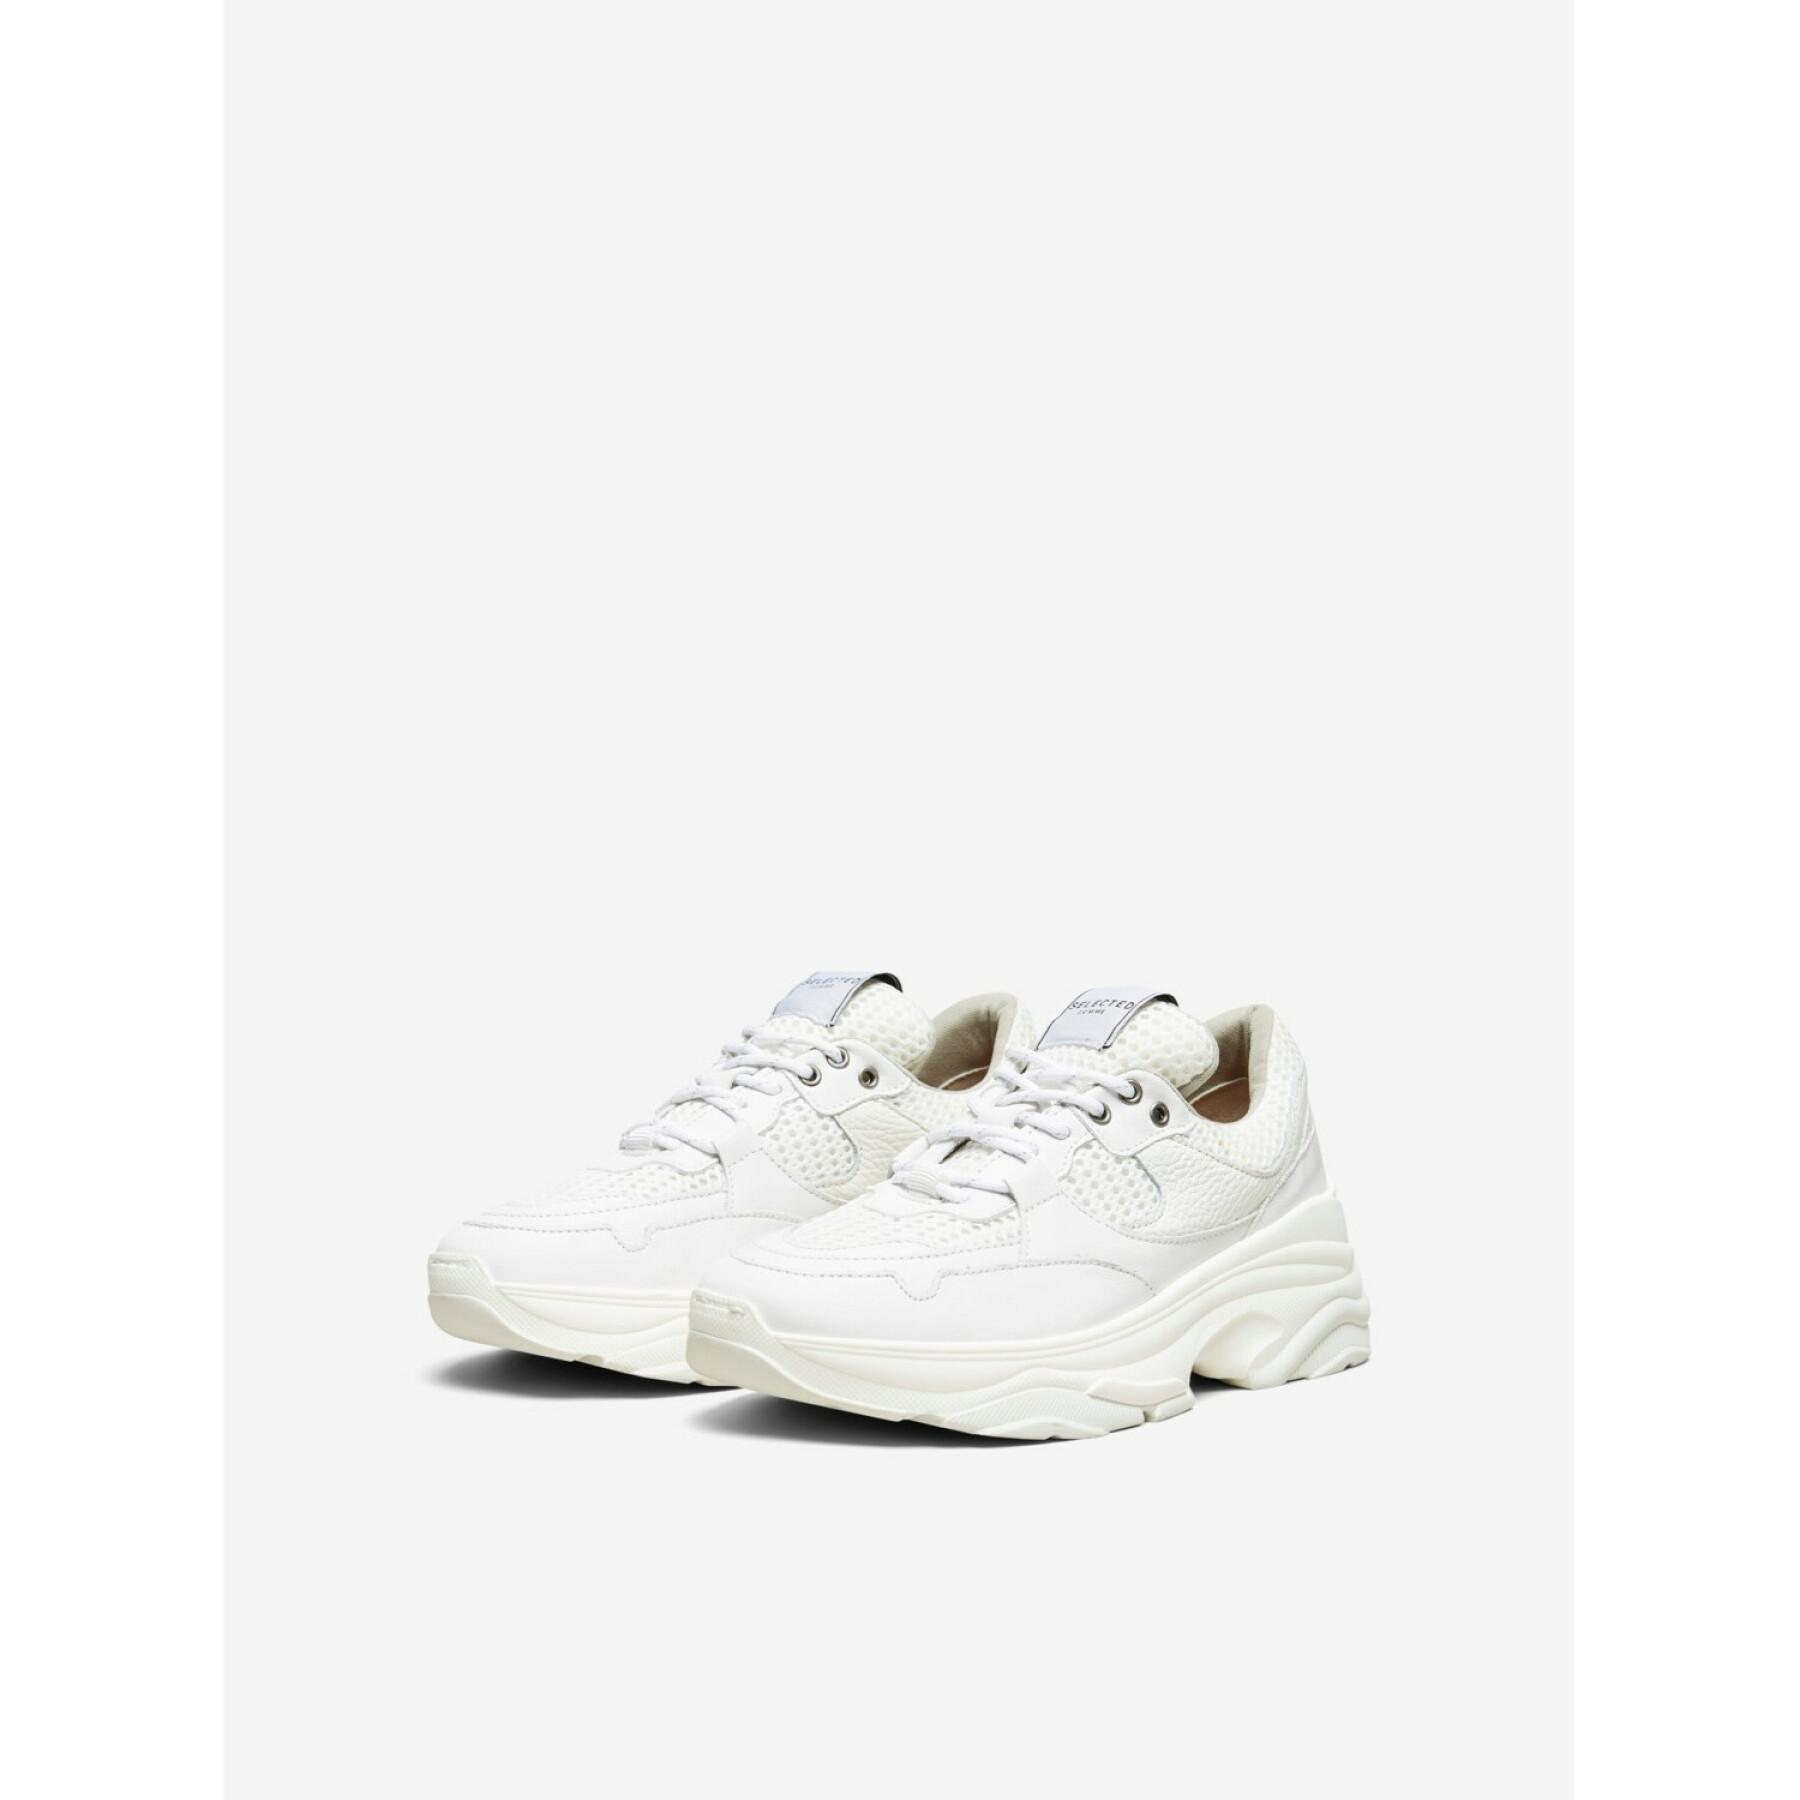 Women's shoes Selected Gavina leather trainer